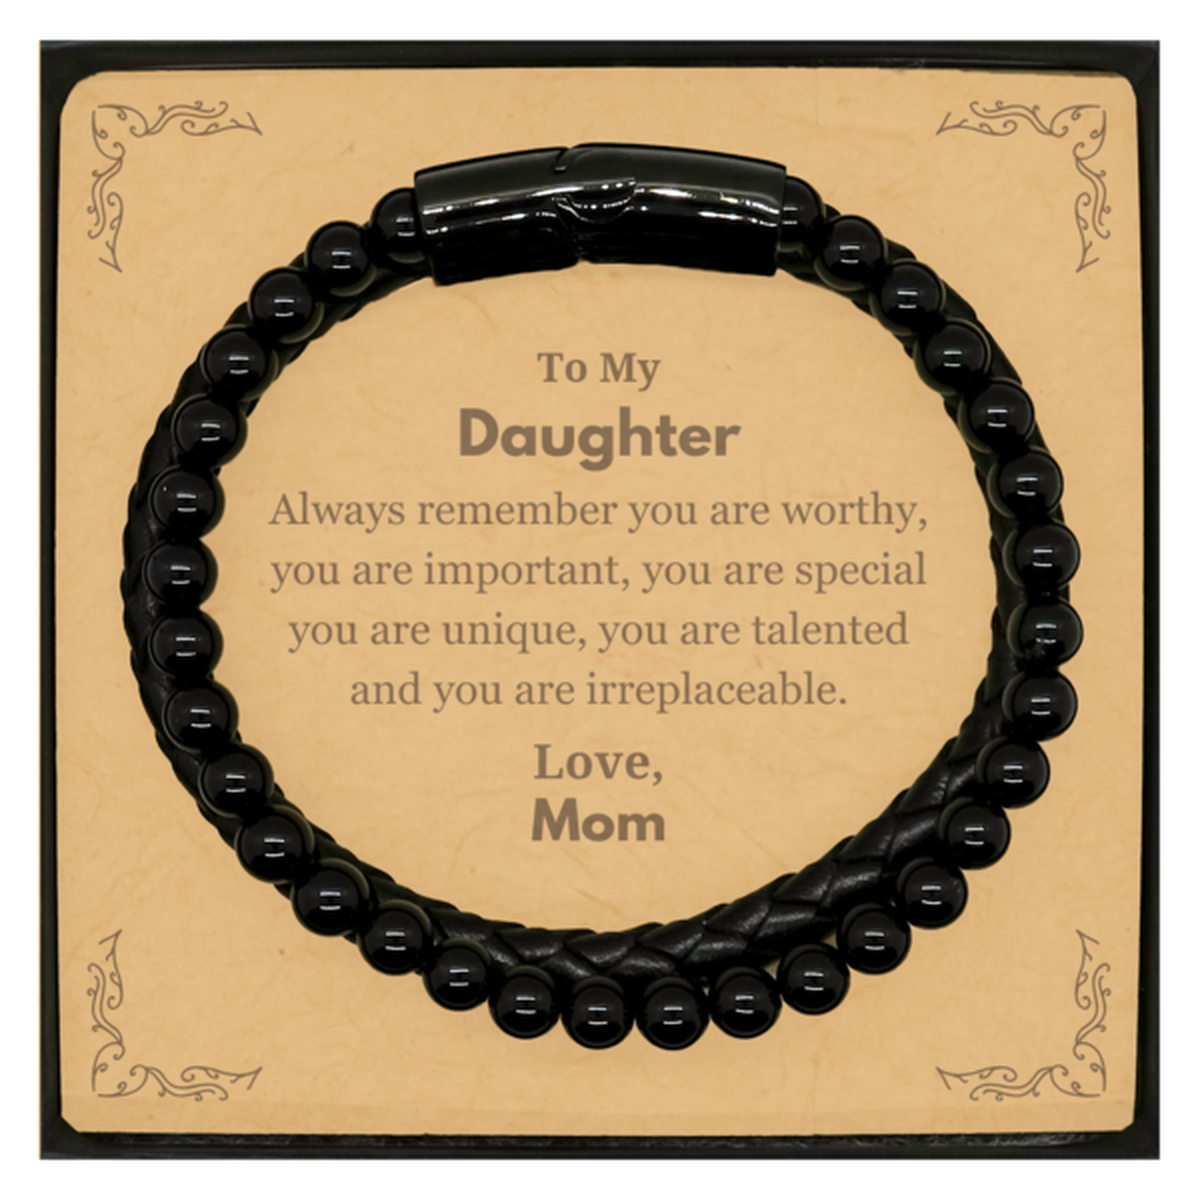 Daughter Birthday Gifts from Mom, Inspirational Stone Leather Bracelets for Daughter Christmas Graduation Gifts for Daughter Always remember you are worthy, you are important. Love, Mom